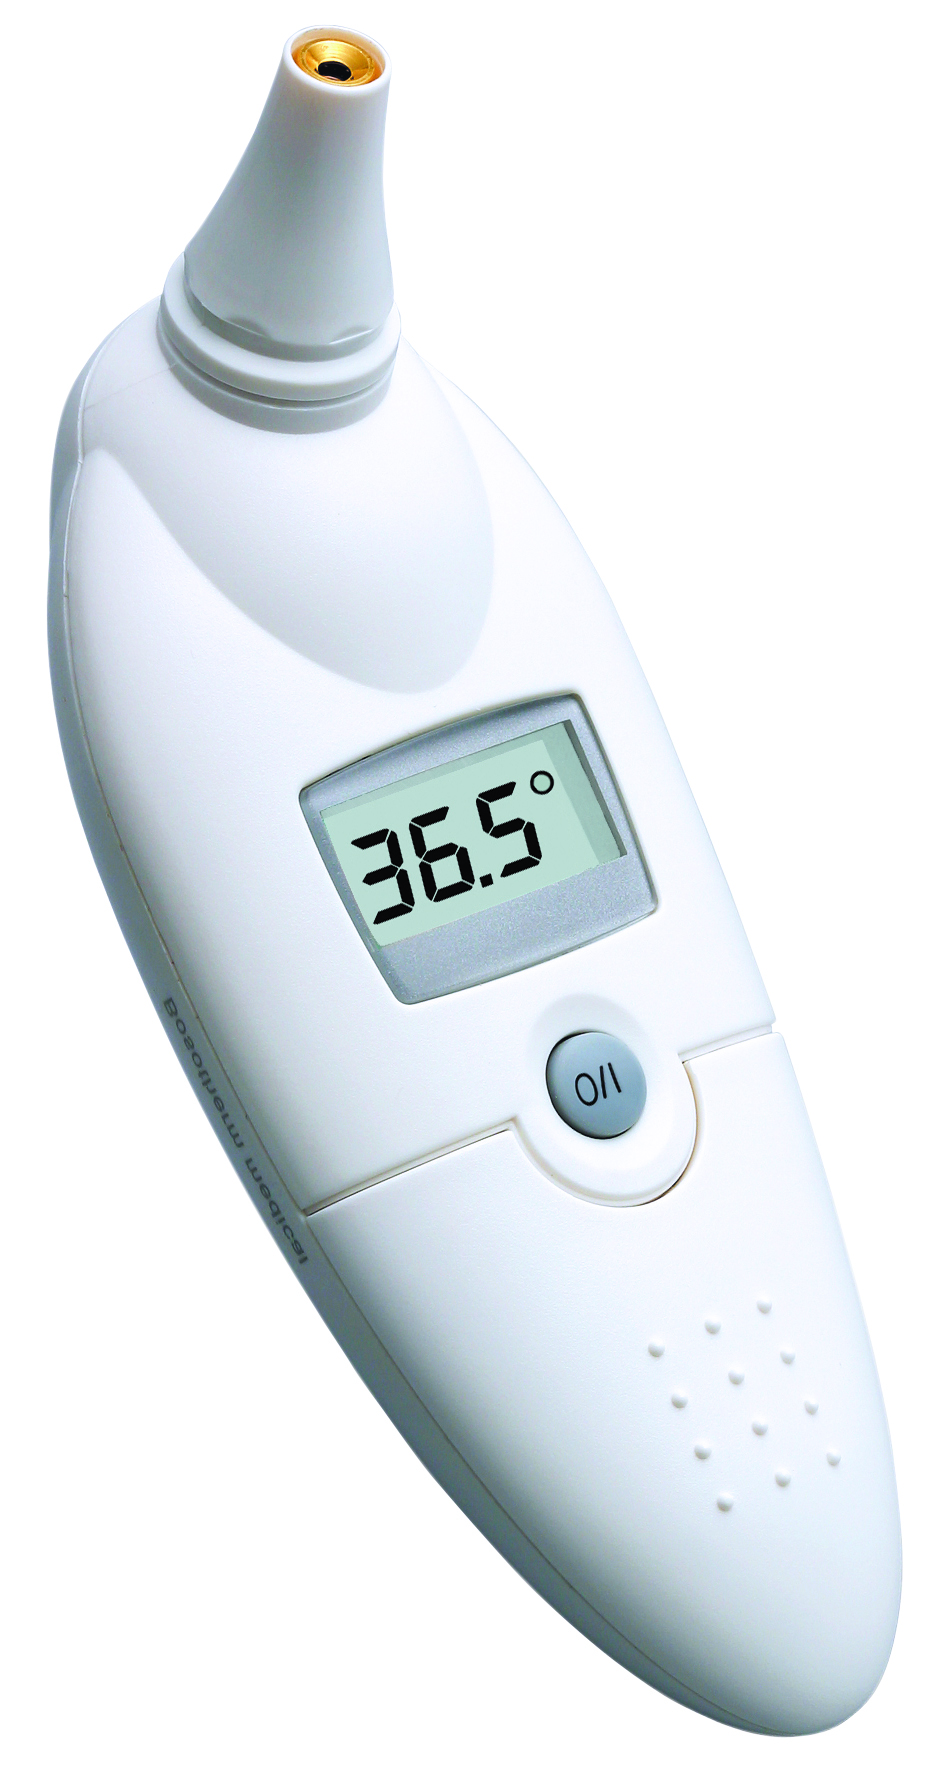 bosotherm medical Infarot-Ohrthermometer